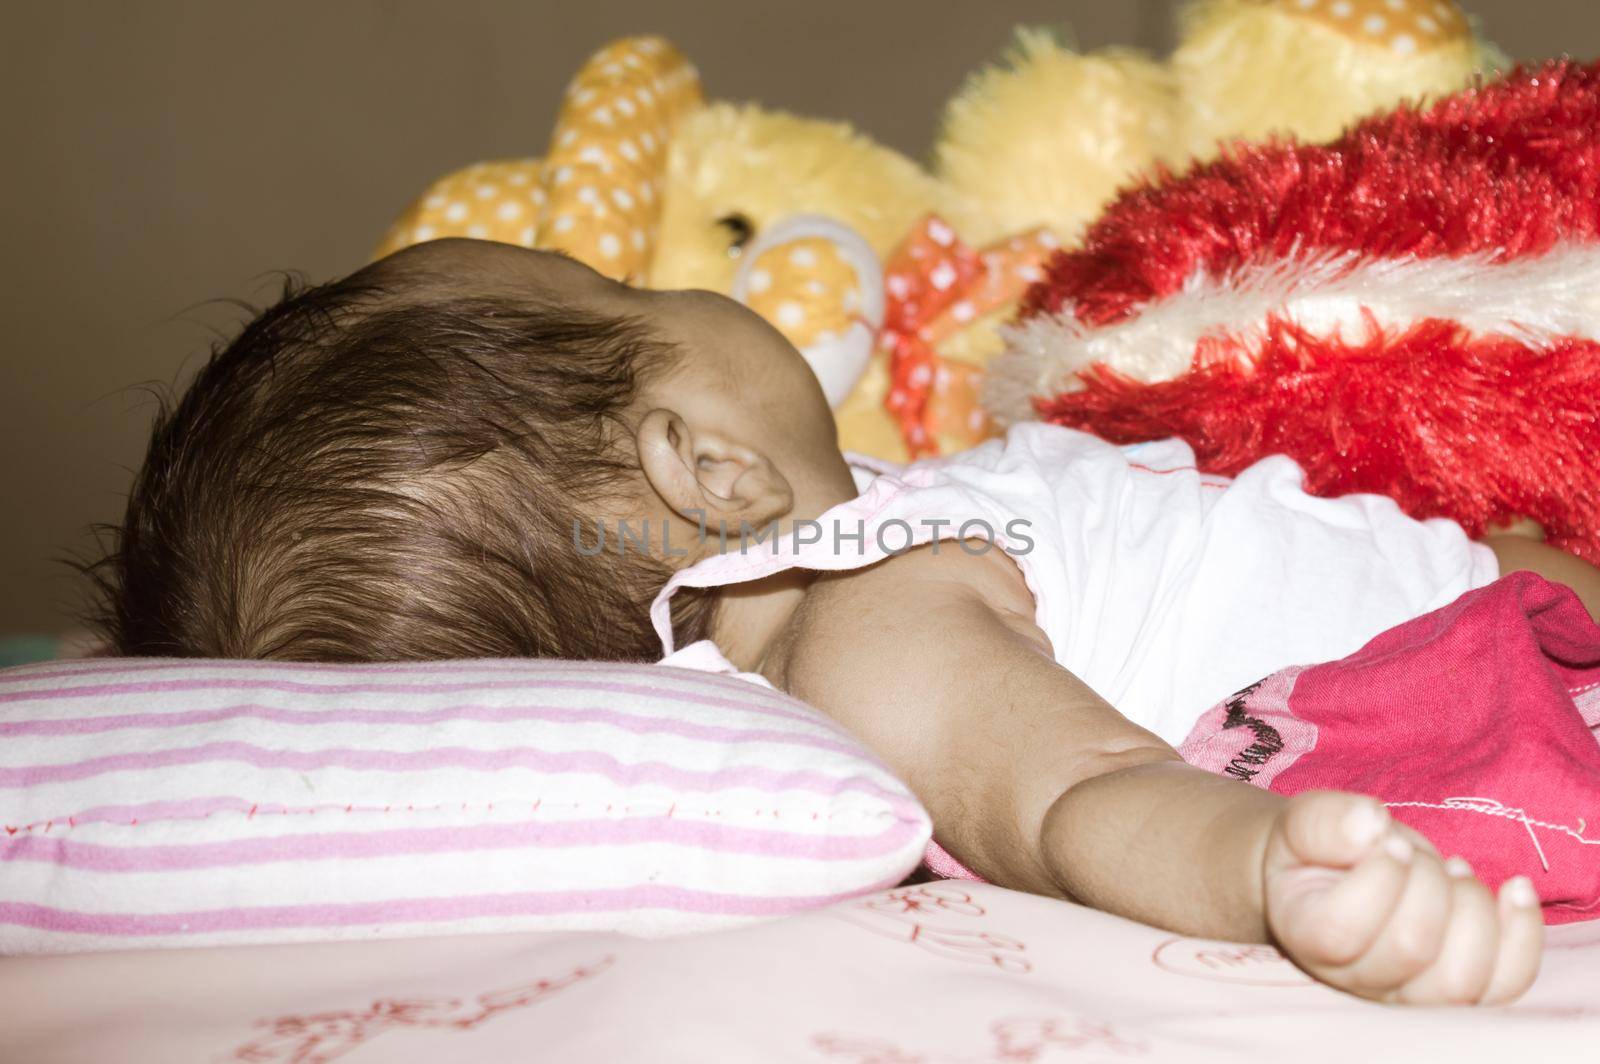 One Sleeping newborn baby boy in sleepy mood lying on bed facing off the camera. Three month old Sweet little infant toddler. Indian ethnicity. Front view. Child care peace tranquil background.